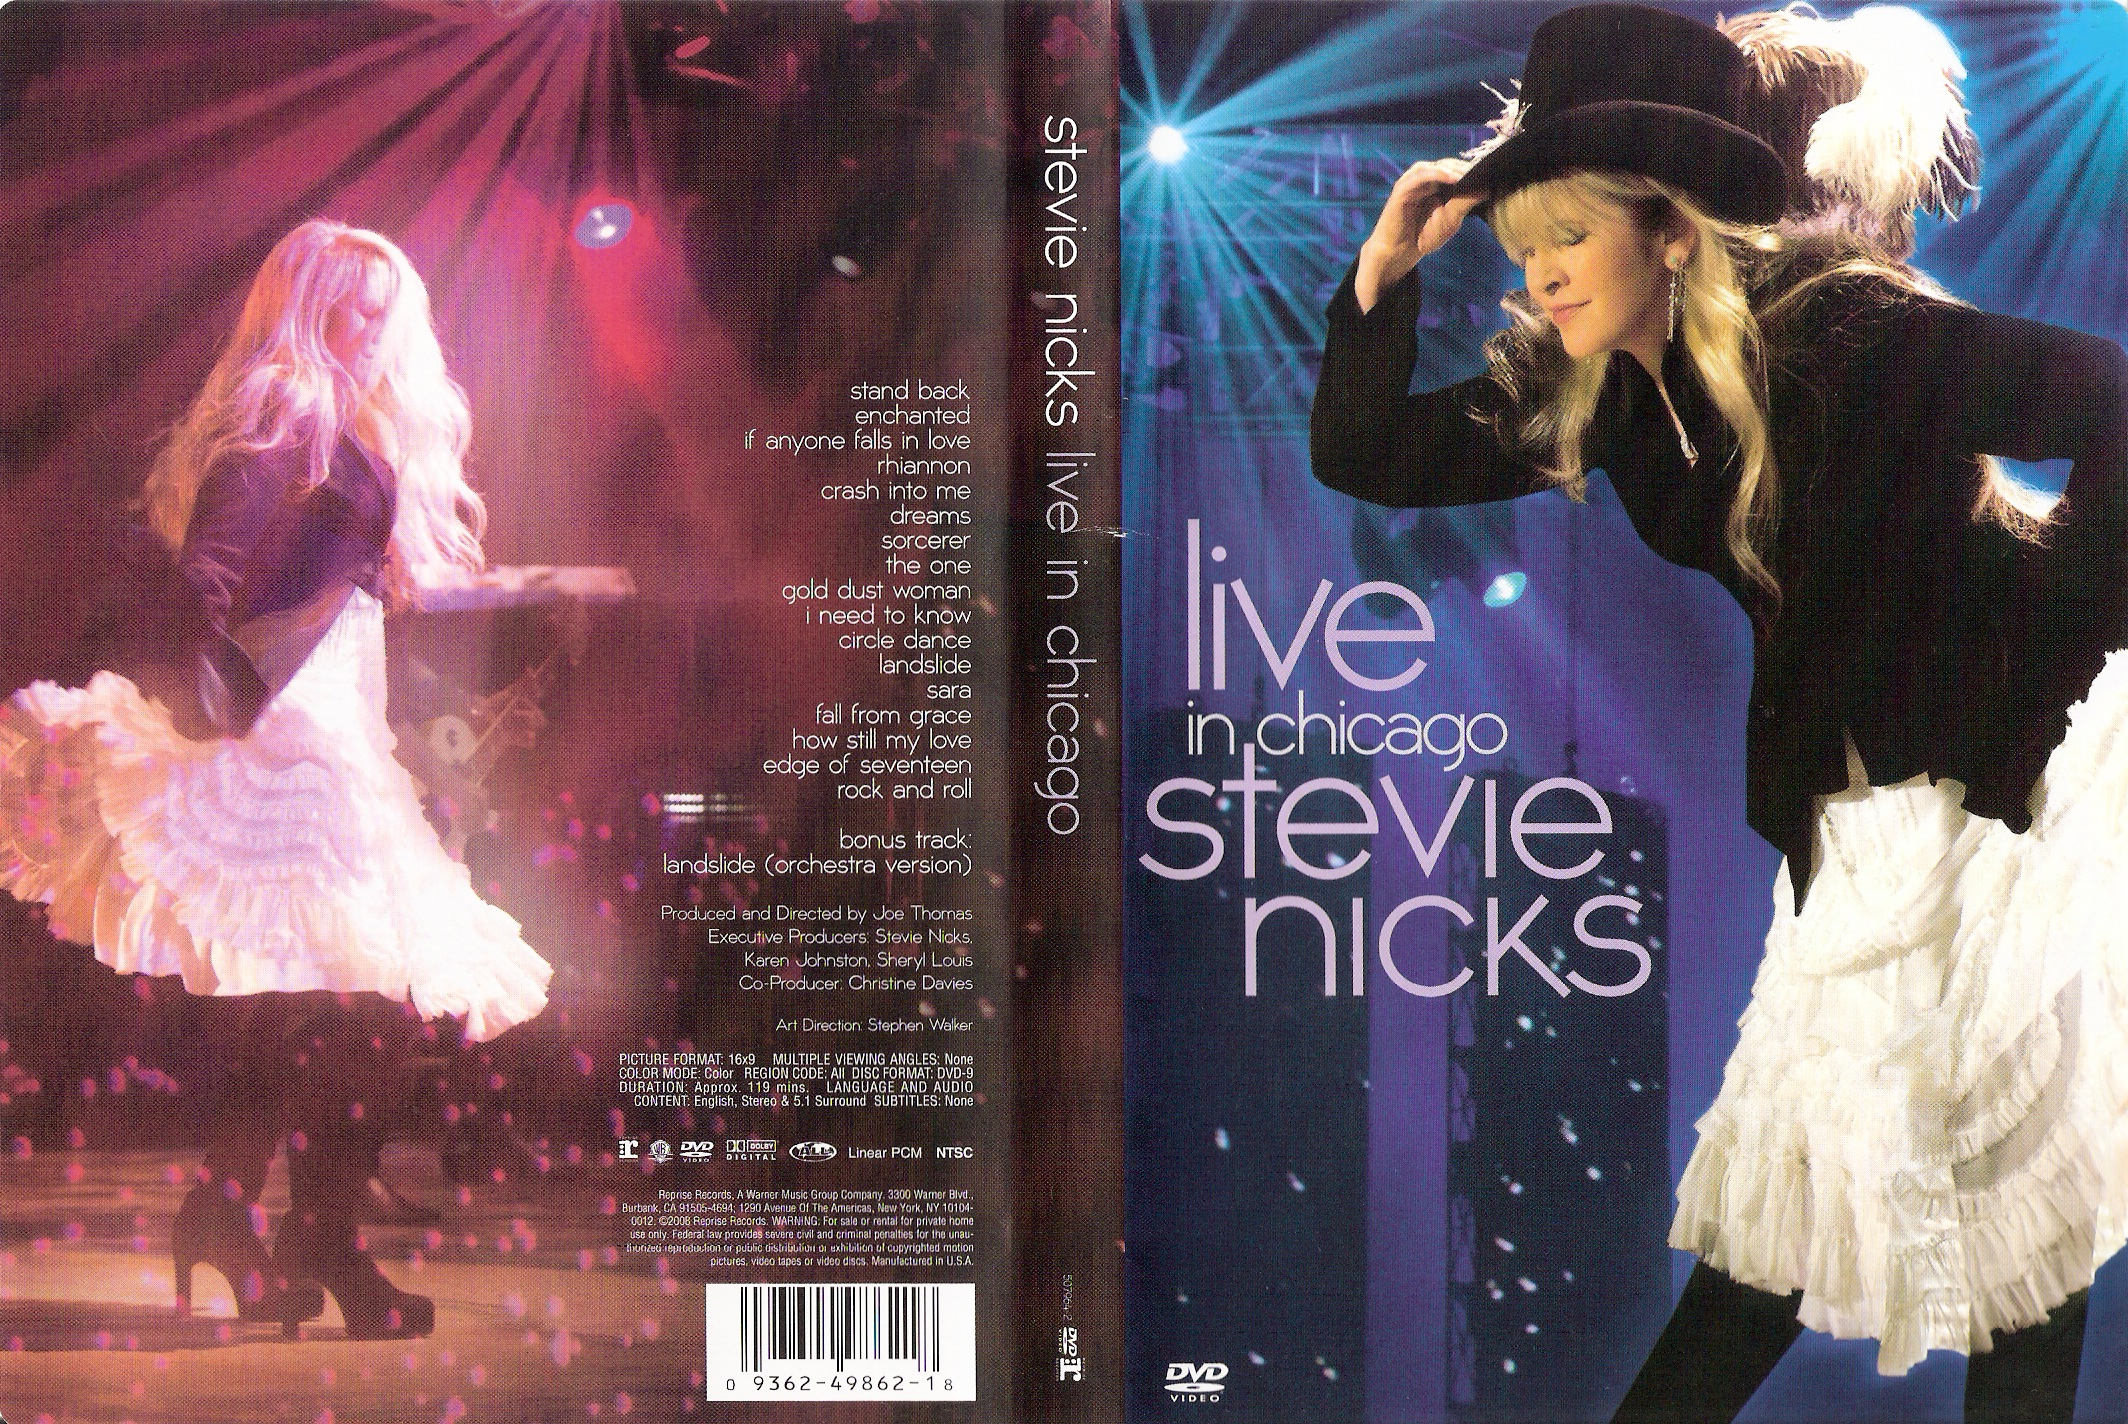 Jaquette DVD Stevie Nicks - Live in chicago